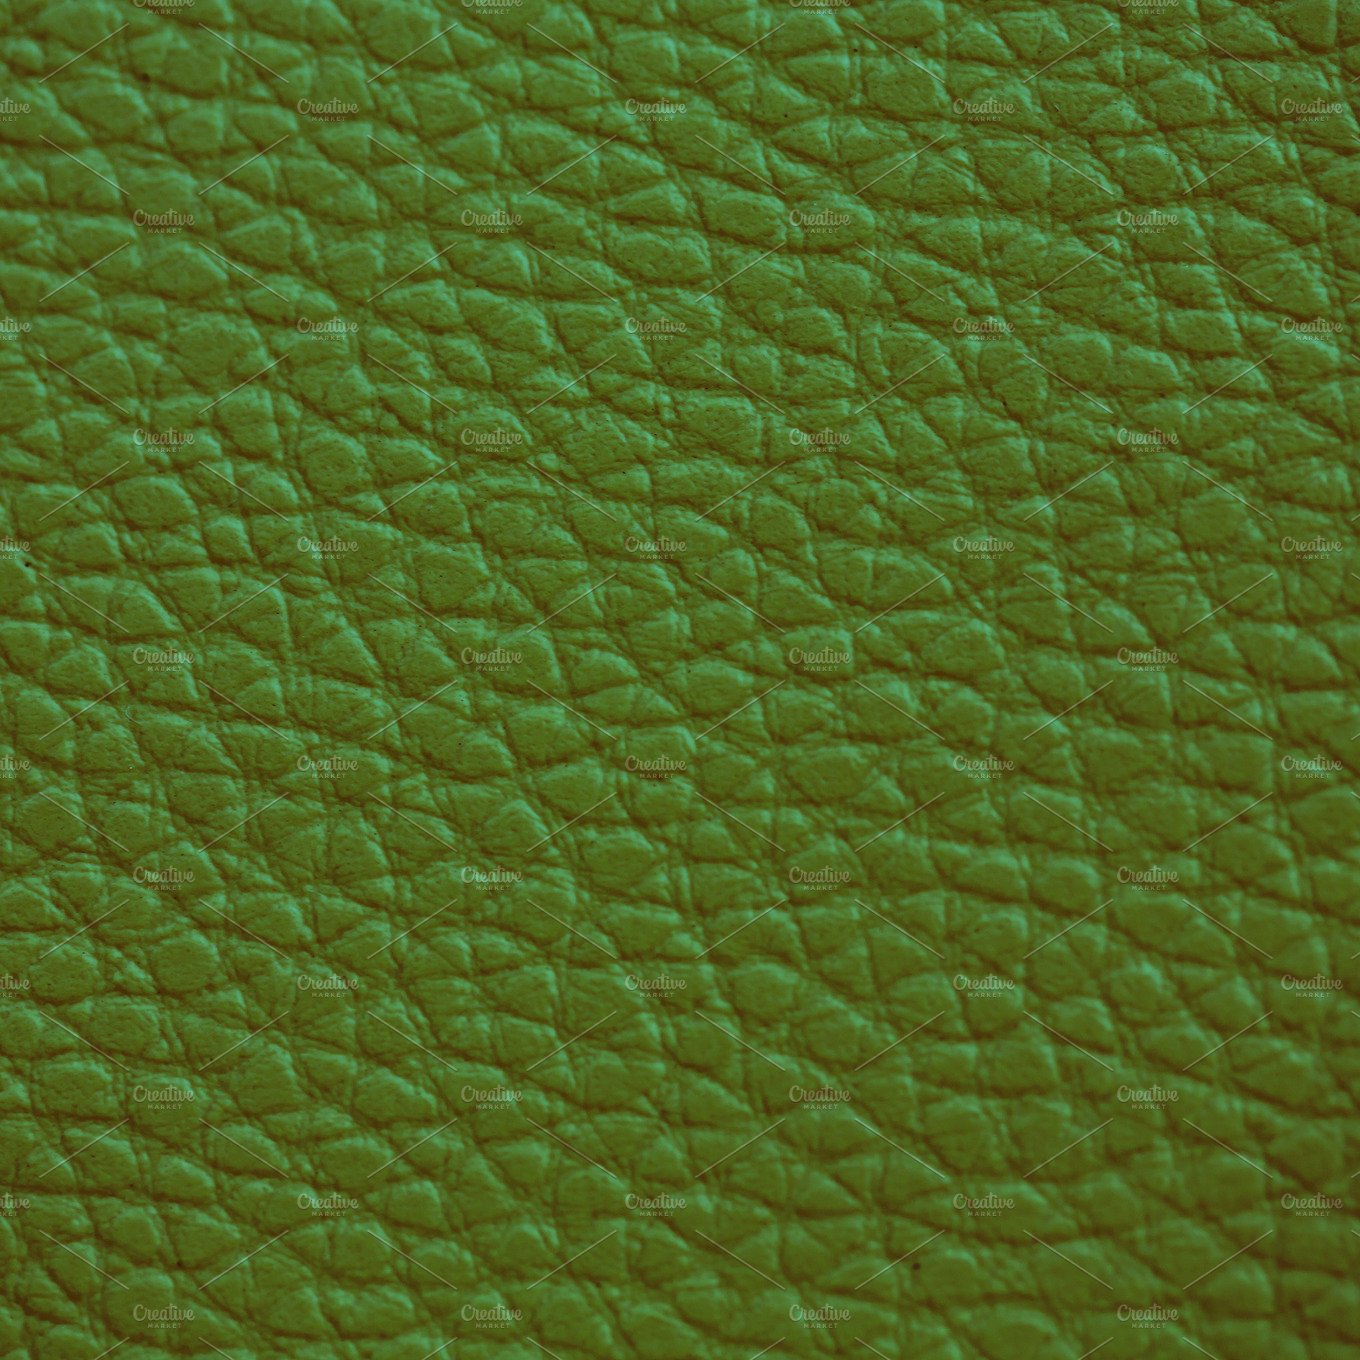 Dark green Leather cover image.